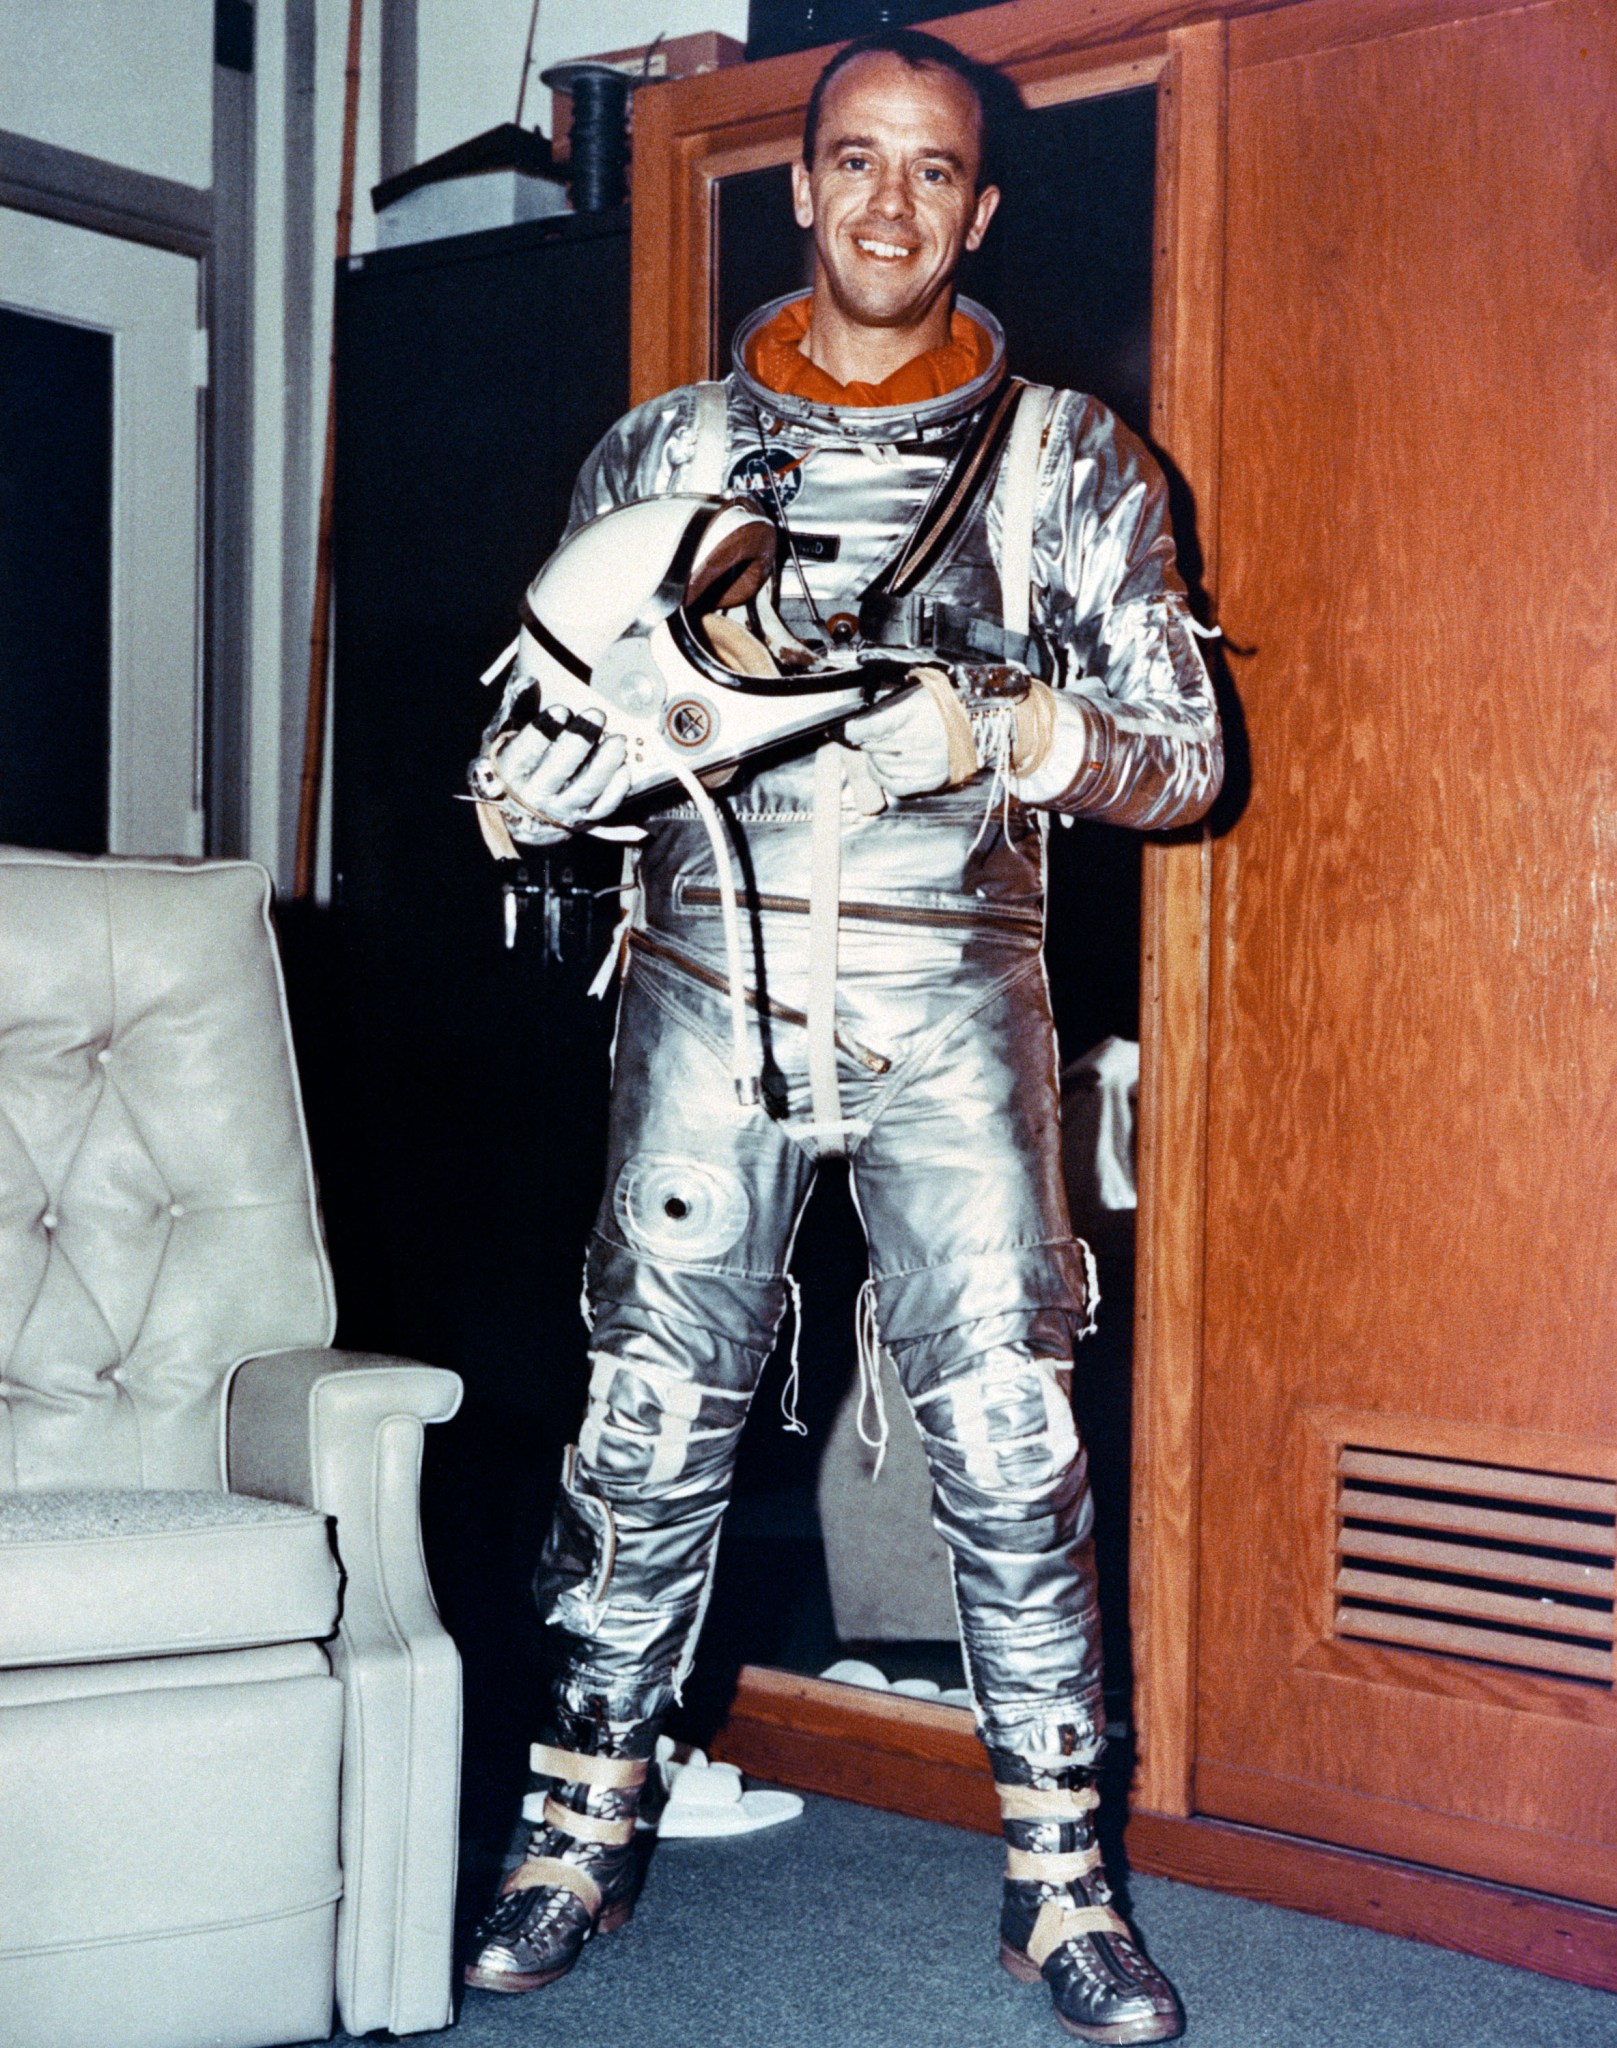 Astronaut Alan Shepard smiles while wearing an all-silver pressure suit for the Mercury mission. He holds a white helmet in his hands.